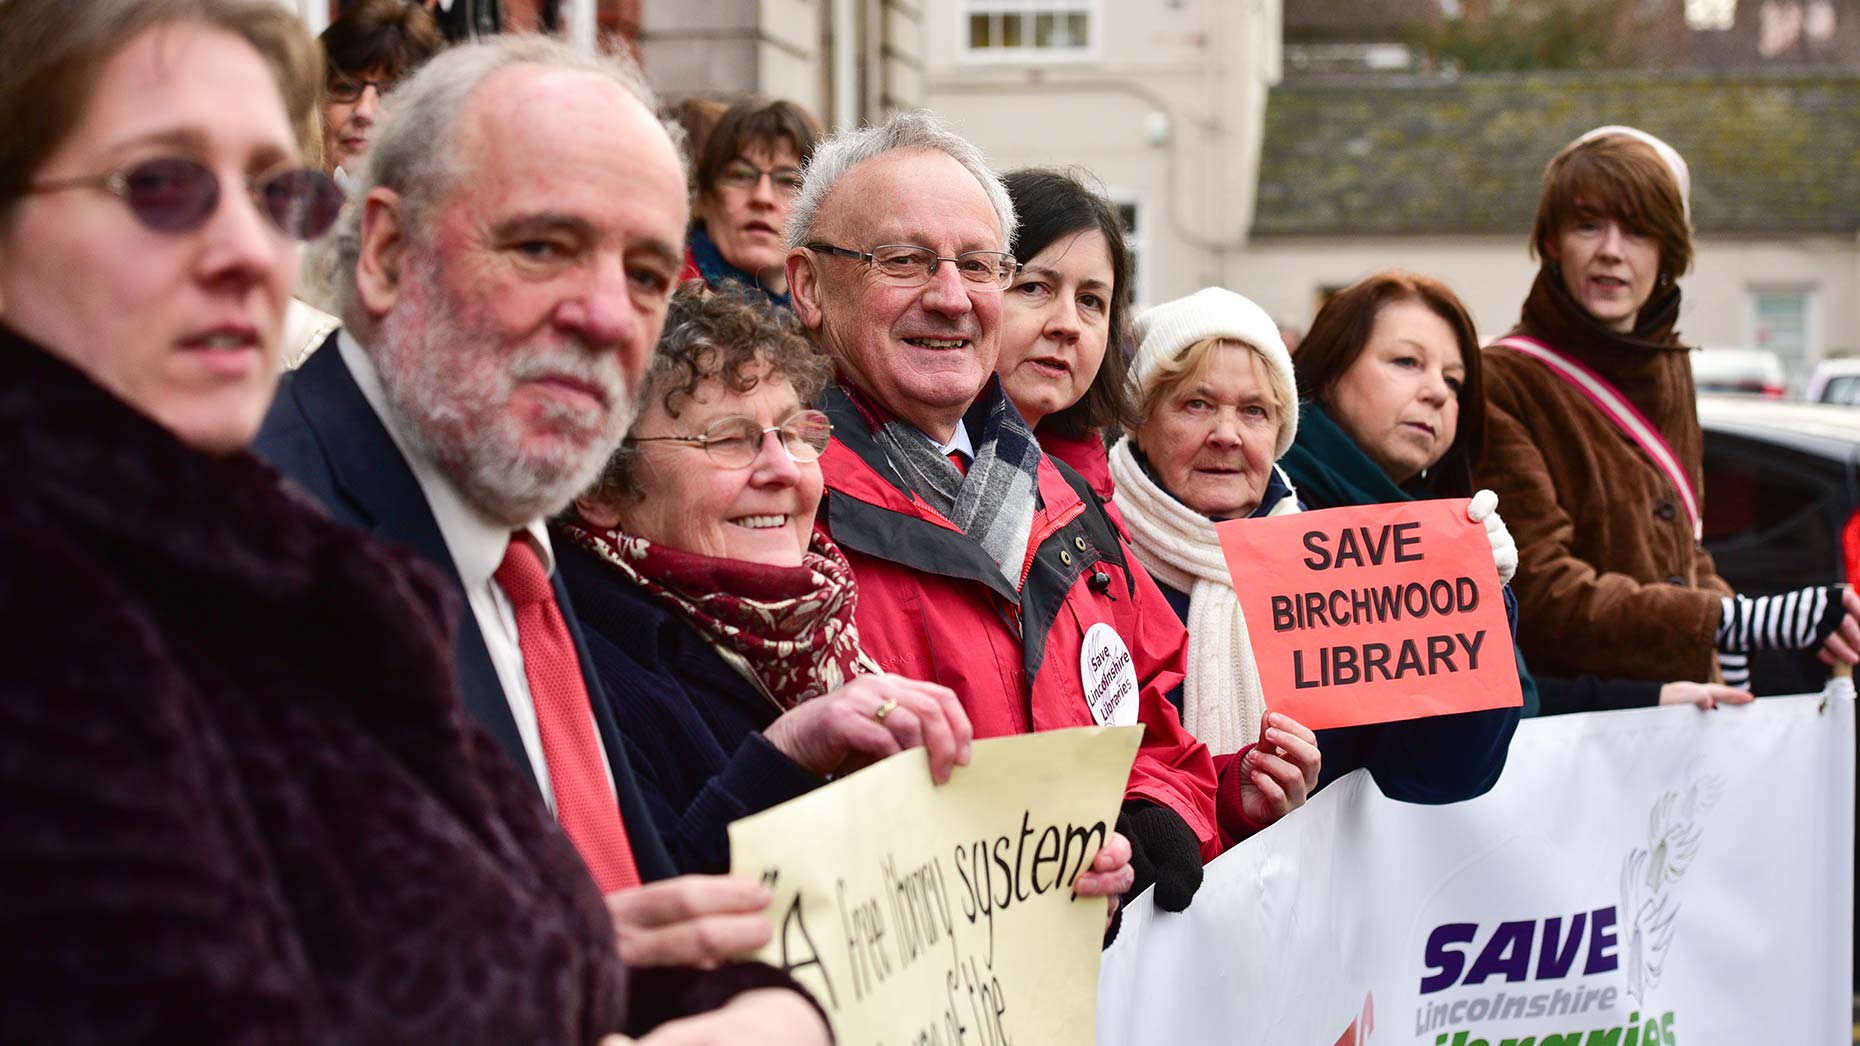 Save Lincolnshire Libraries campaigners outside the County Council offices. Photo: Steve Smailes for The Lincolnite